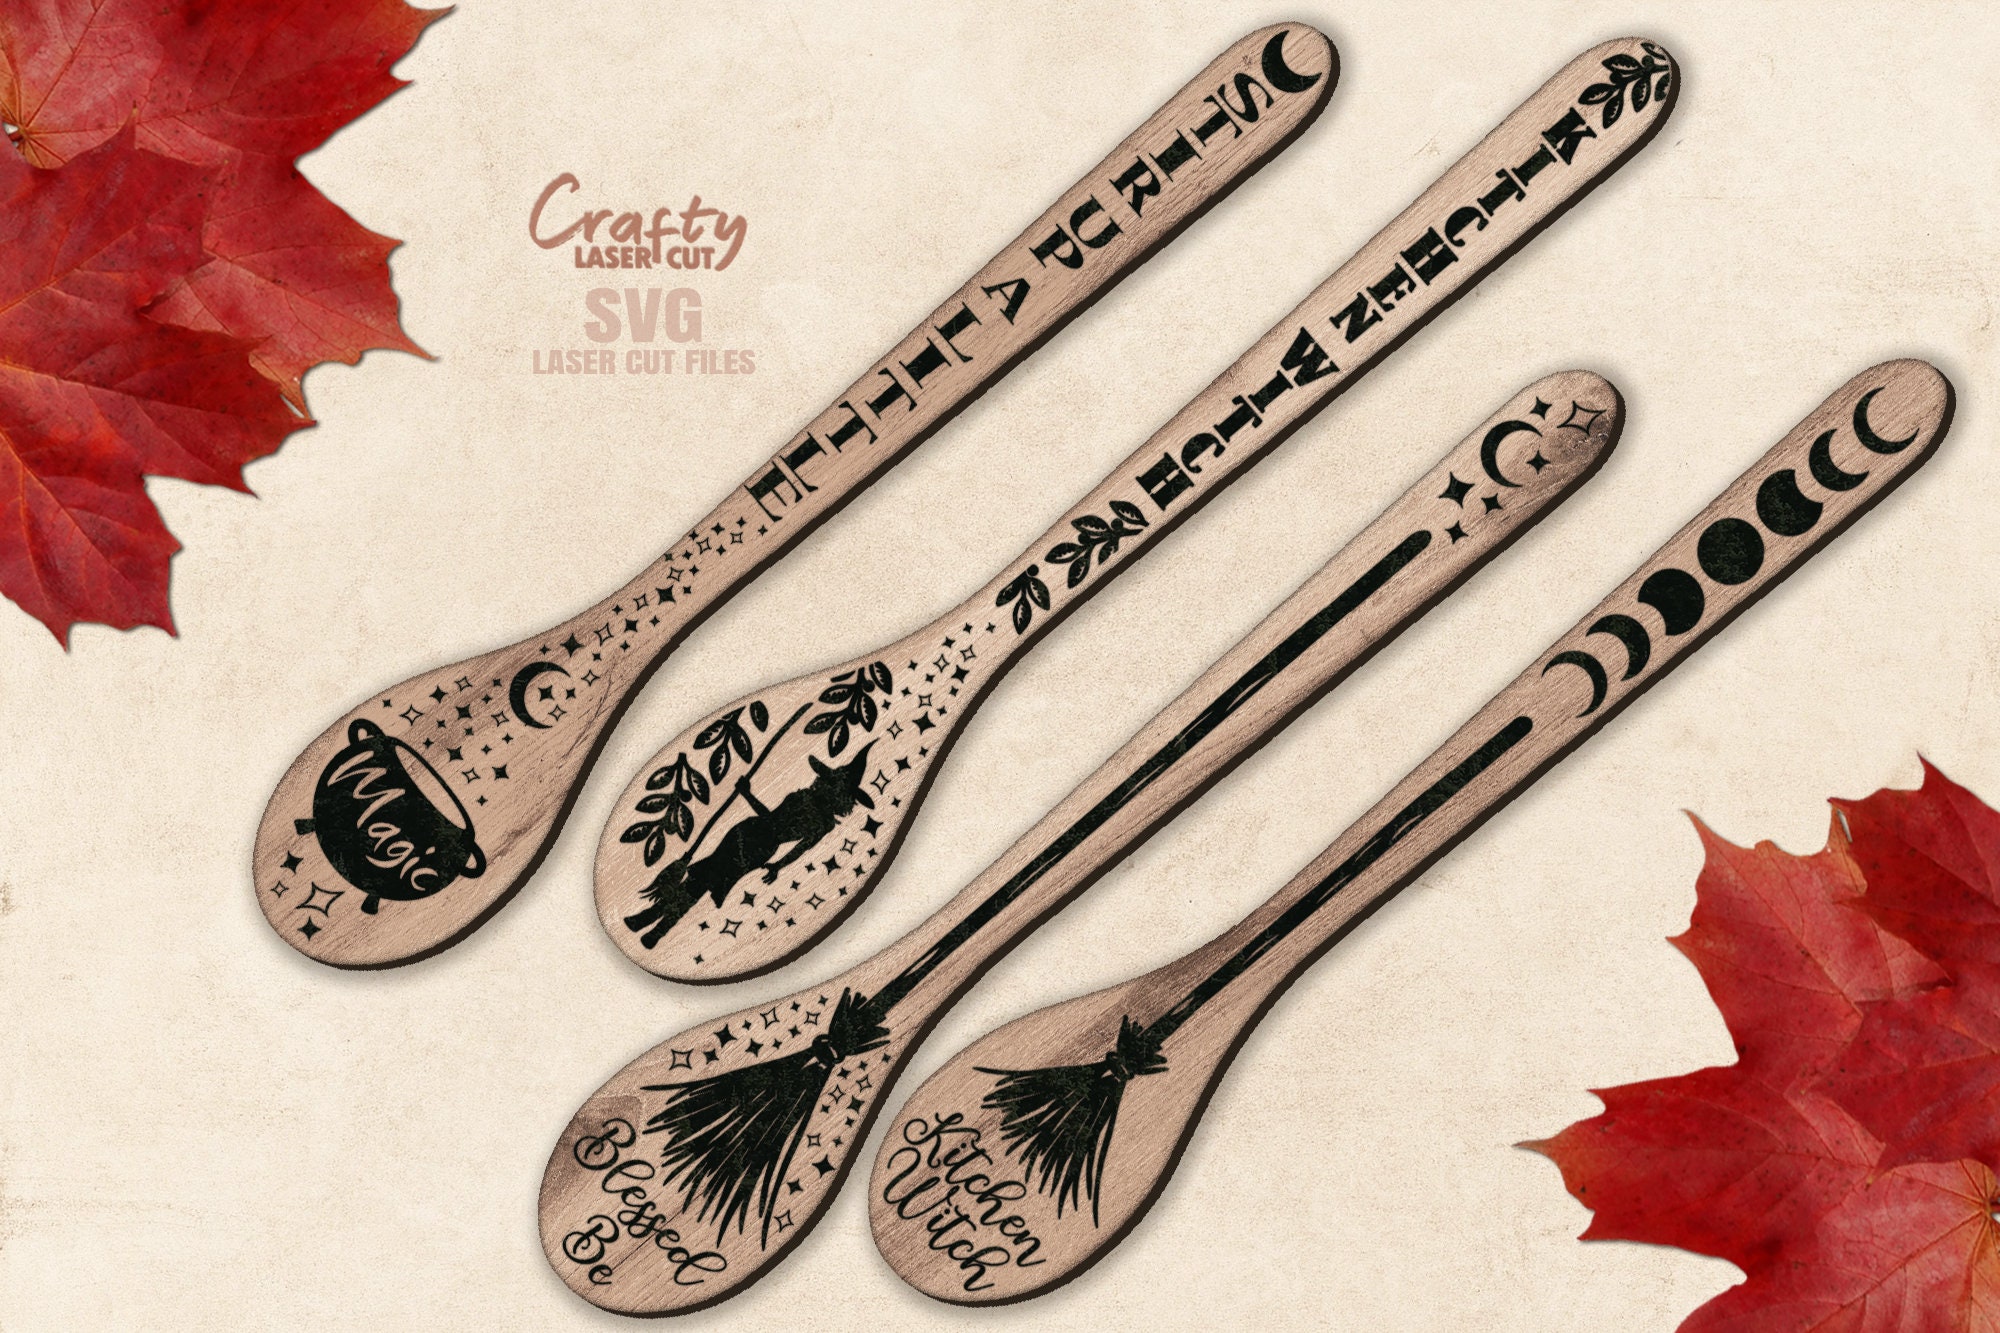 FUTERLY 5 pcs witchy wooden spoons for cooking - witch gifts for women,witch  stuff wooden spatula